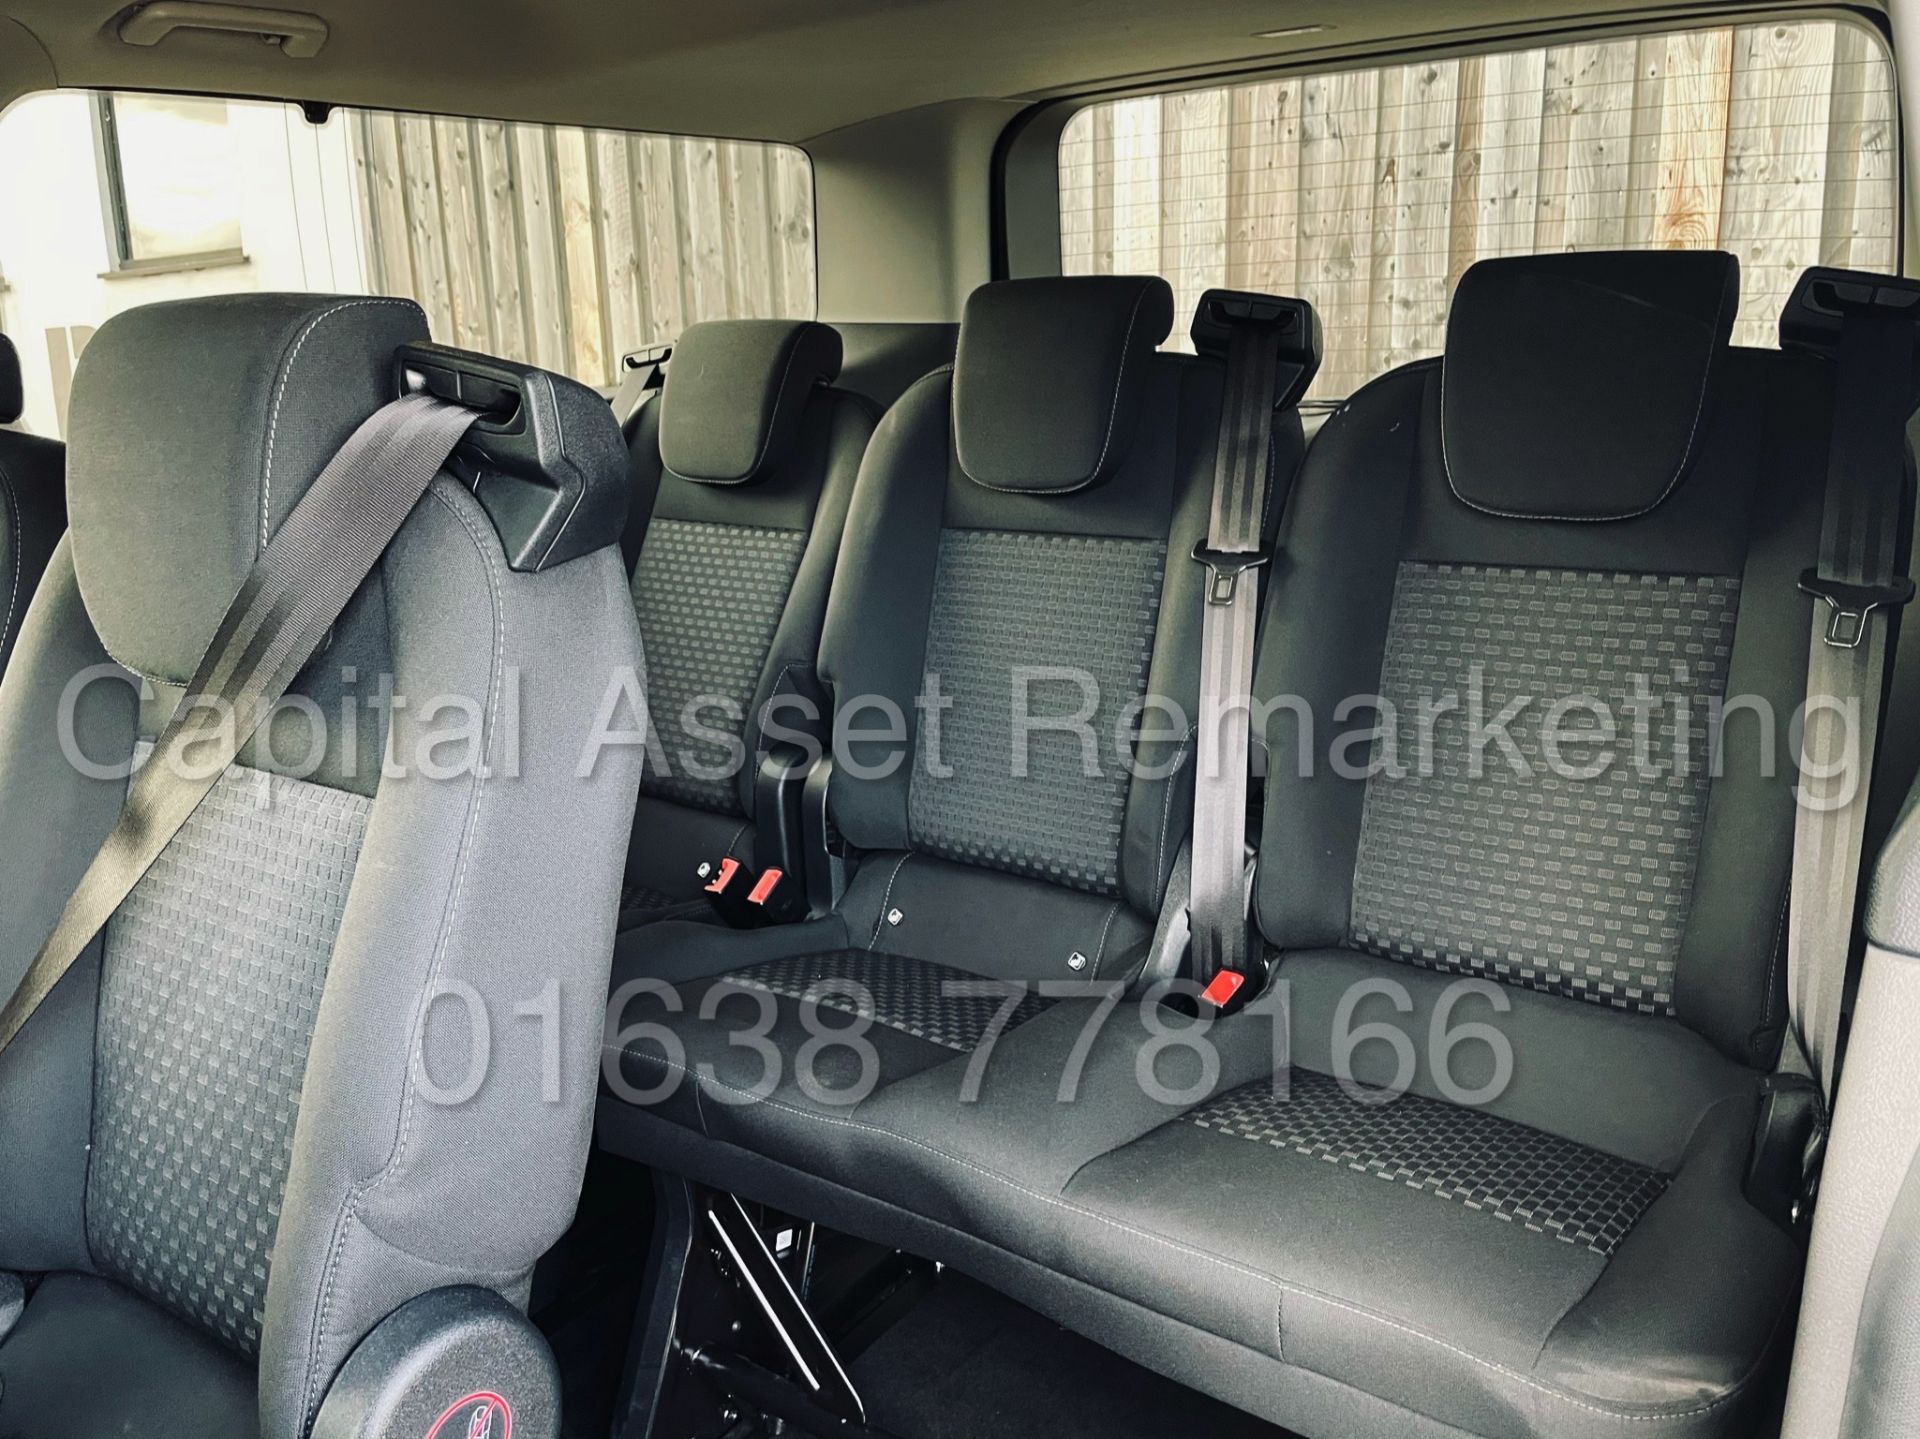 (On Sale) FORD TRANSIT CUSTOM TOURNEO *9 SEATER MPV / BUS* (2019) '2.0 TDCI - 130 BHP' (1 OWNER) - Image 24 of 46